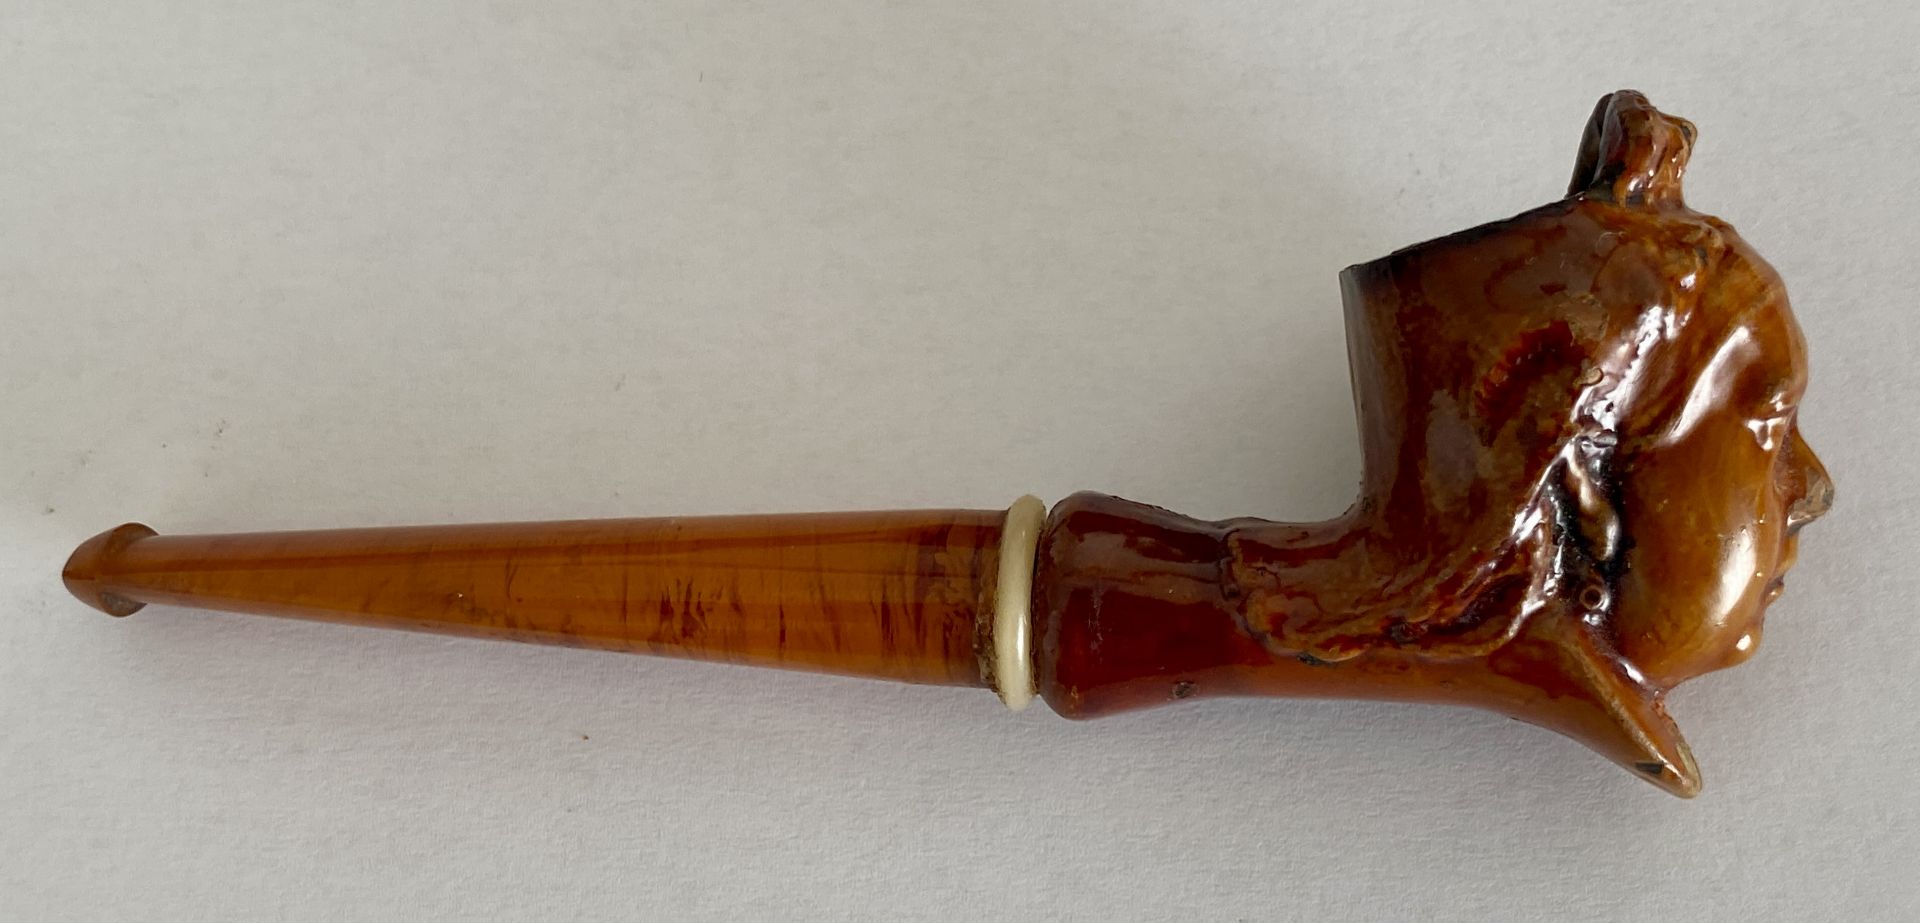 AN ANTIQUE BRITISH QUEEN VICTORIA TREACLE GLAZE TOBACCO PIPE WITH AMBER EFFECT PIPE, LENGTH 13 CM - Image 6 of 7